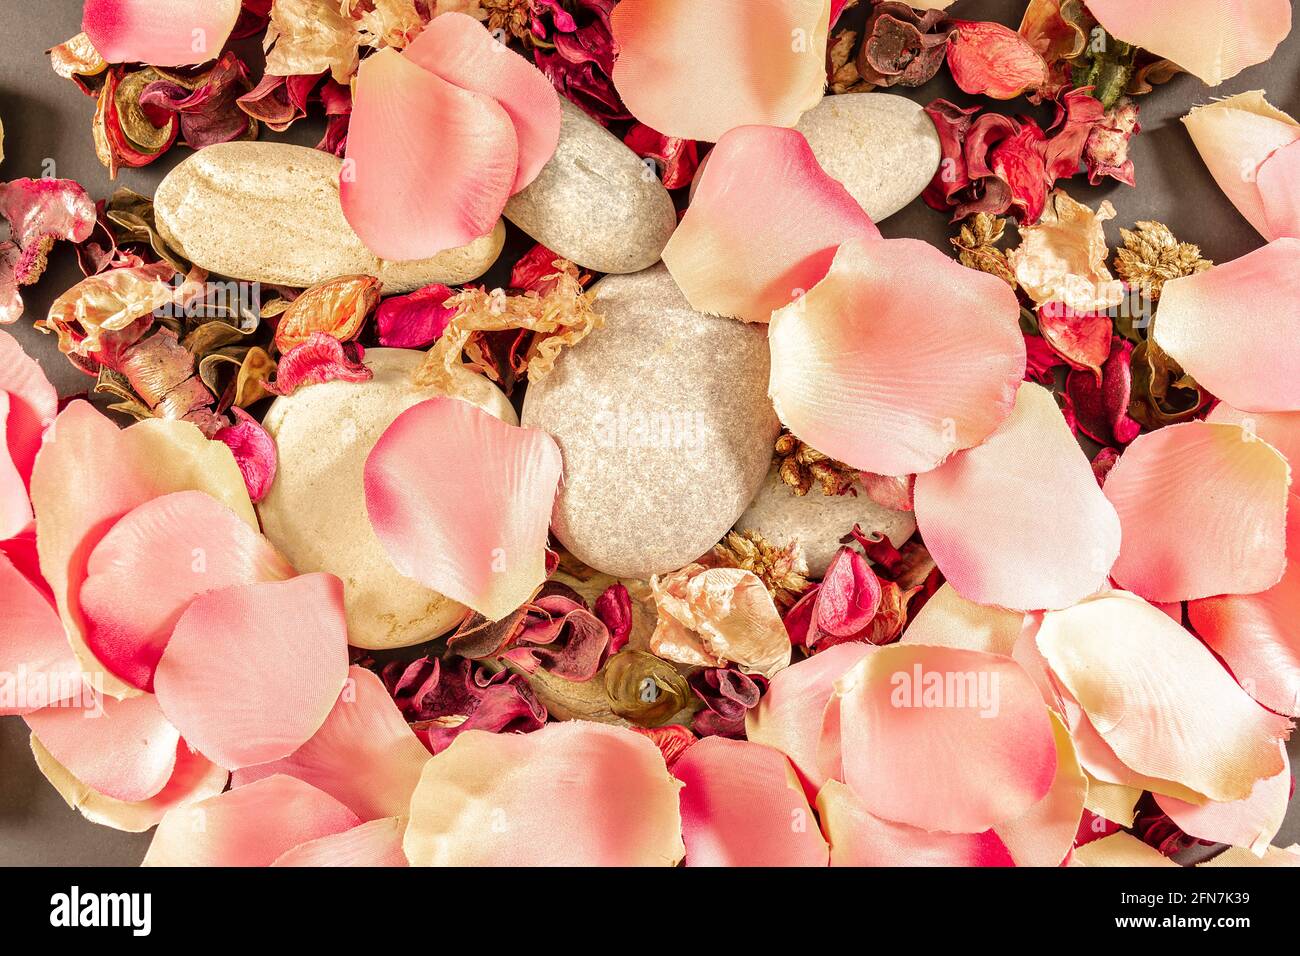 Wallpaper of dried flowers, flower petals and beach stones.Photo shot in horizontal format and zenithal point of view. Stock Photo